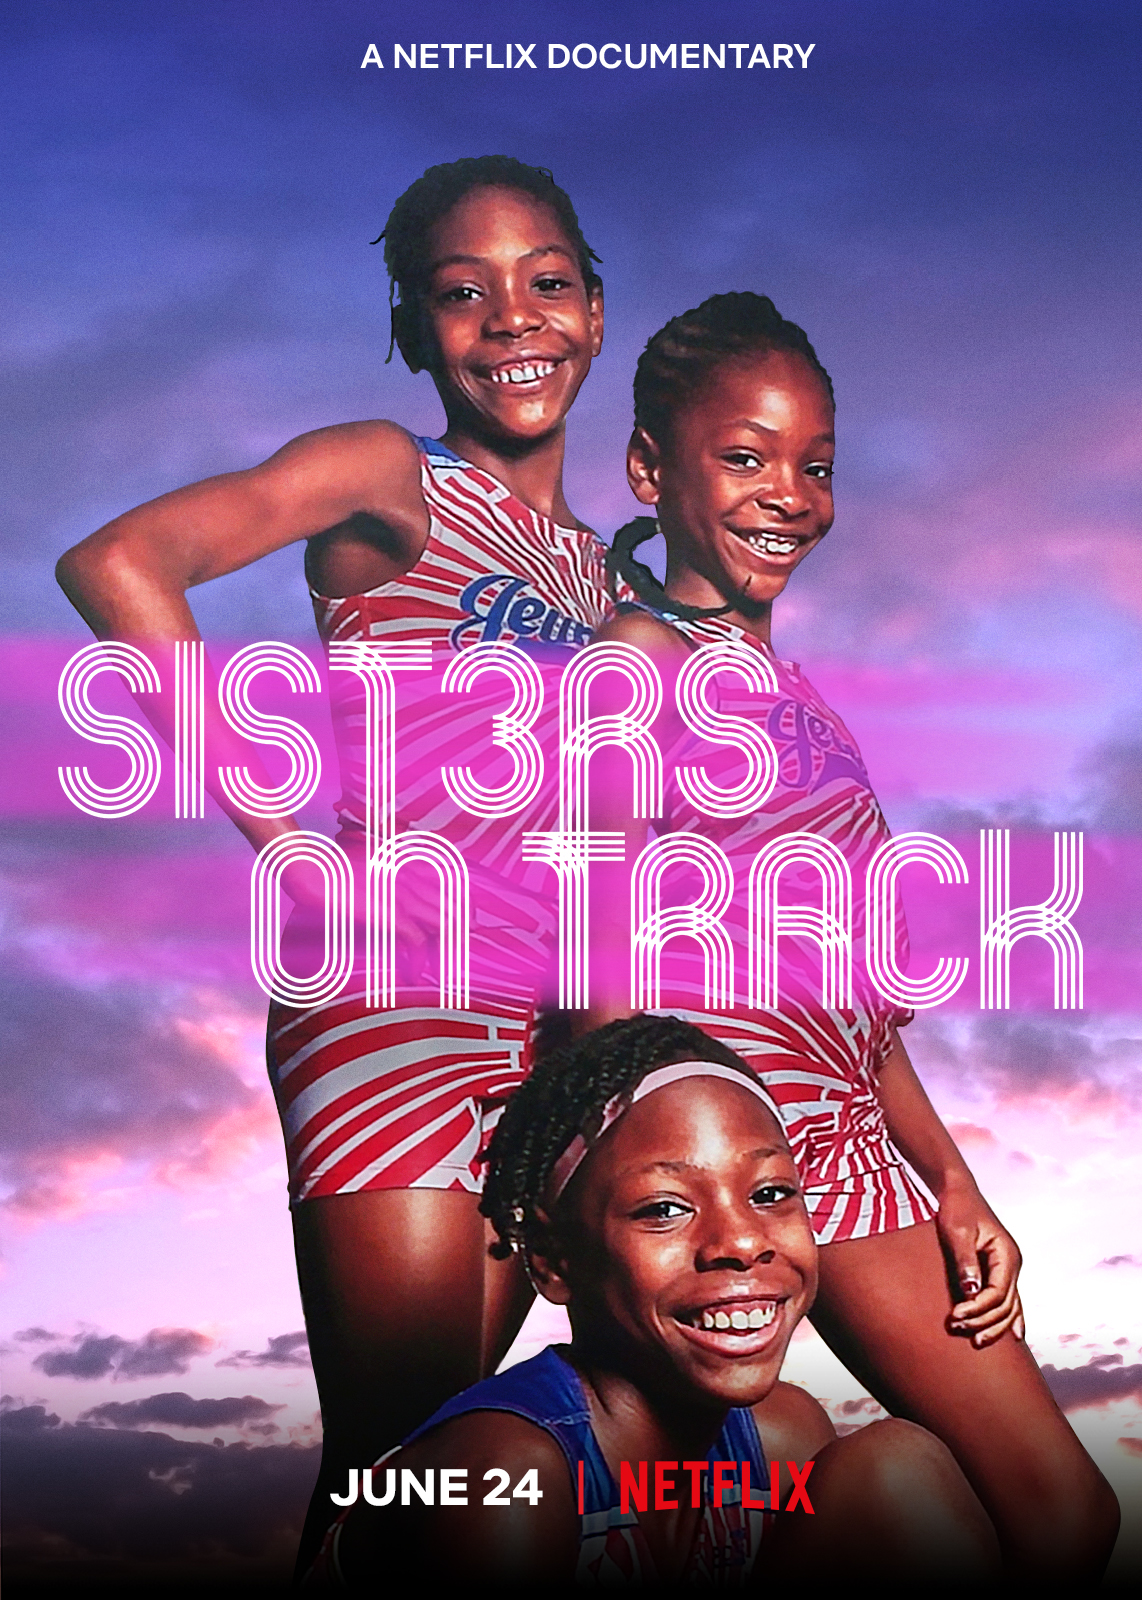 A Netflix Documentary: Sisters On Track